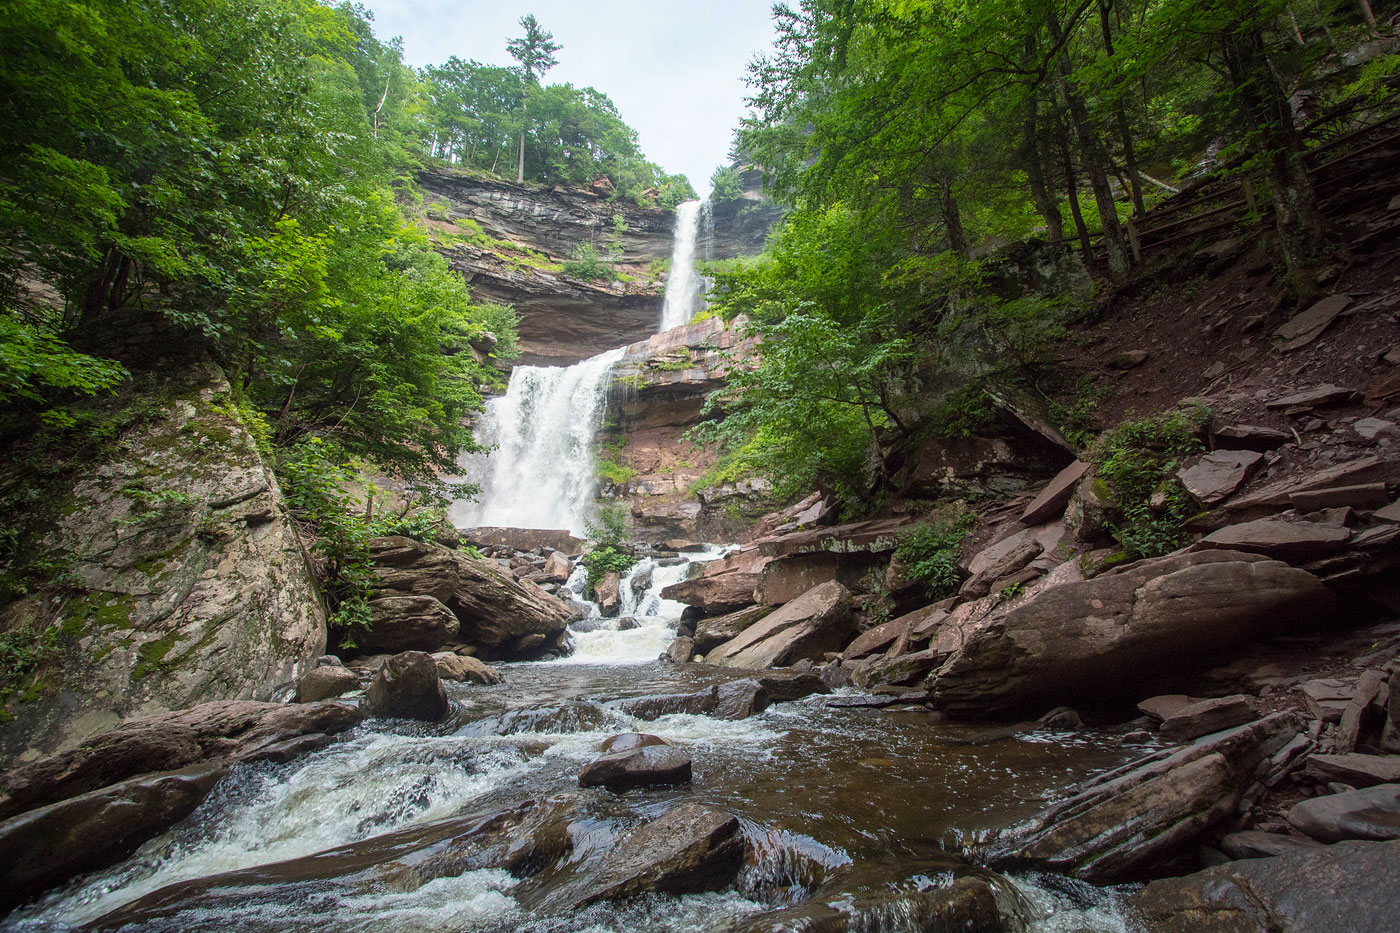 Hike Kaaterskill Falls and South Mountain in Catskill State Park, New York - Stav is Lost